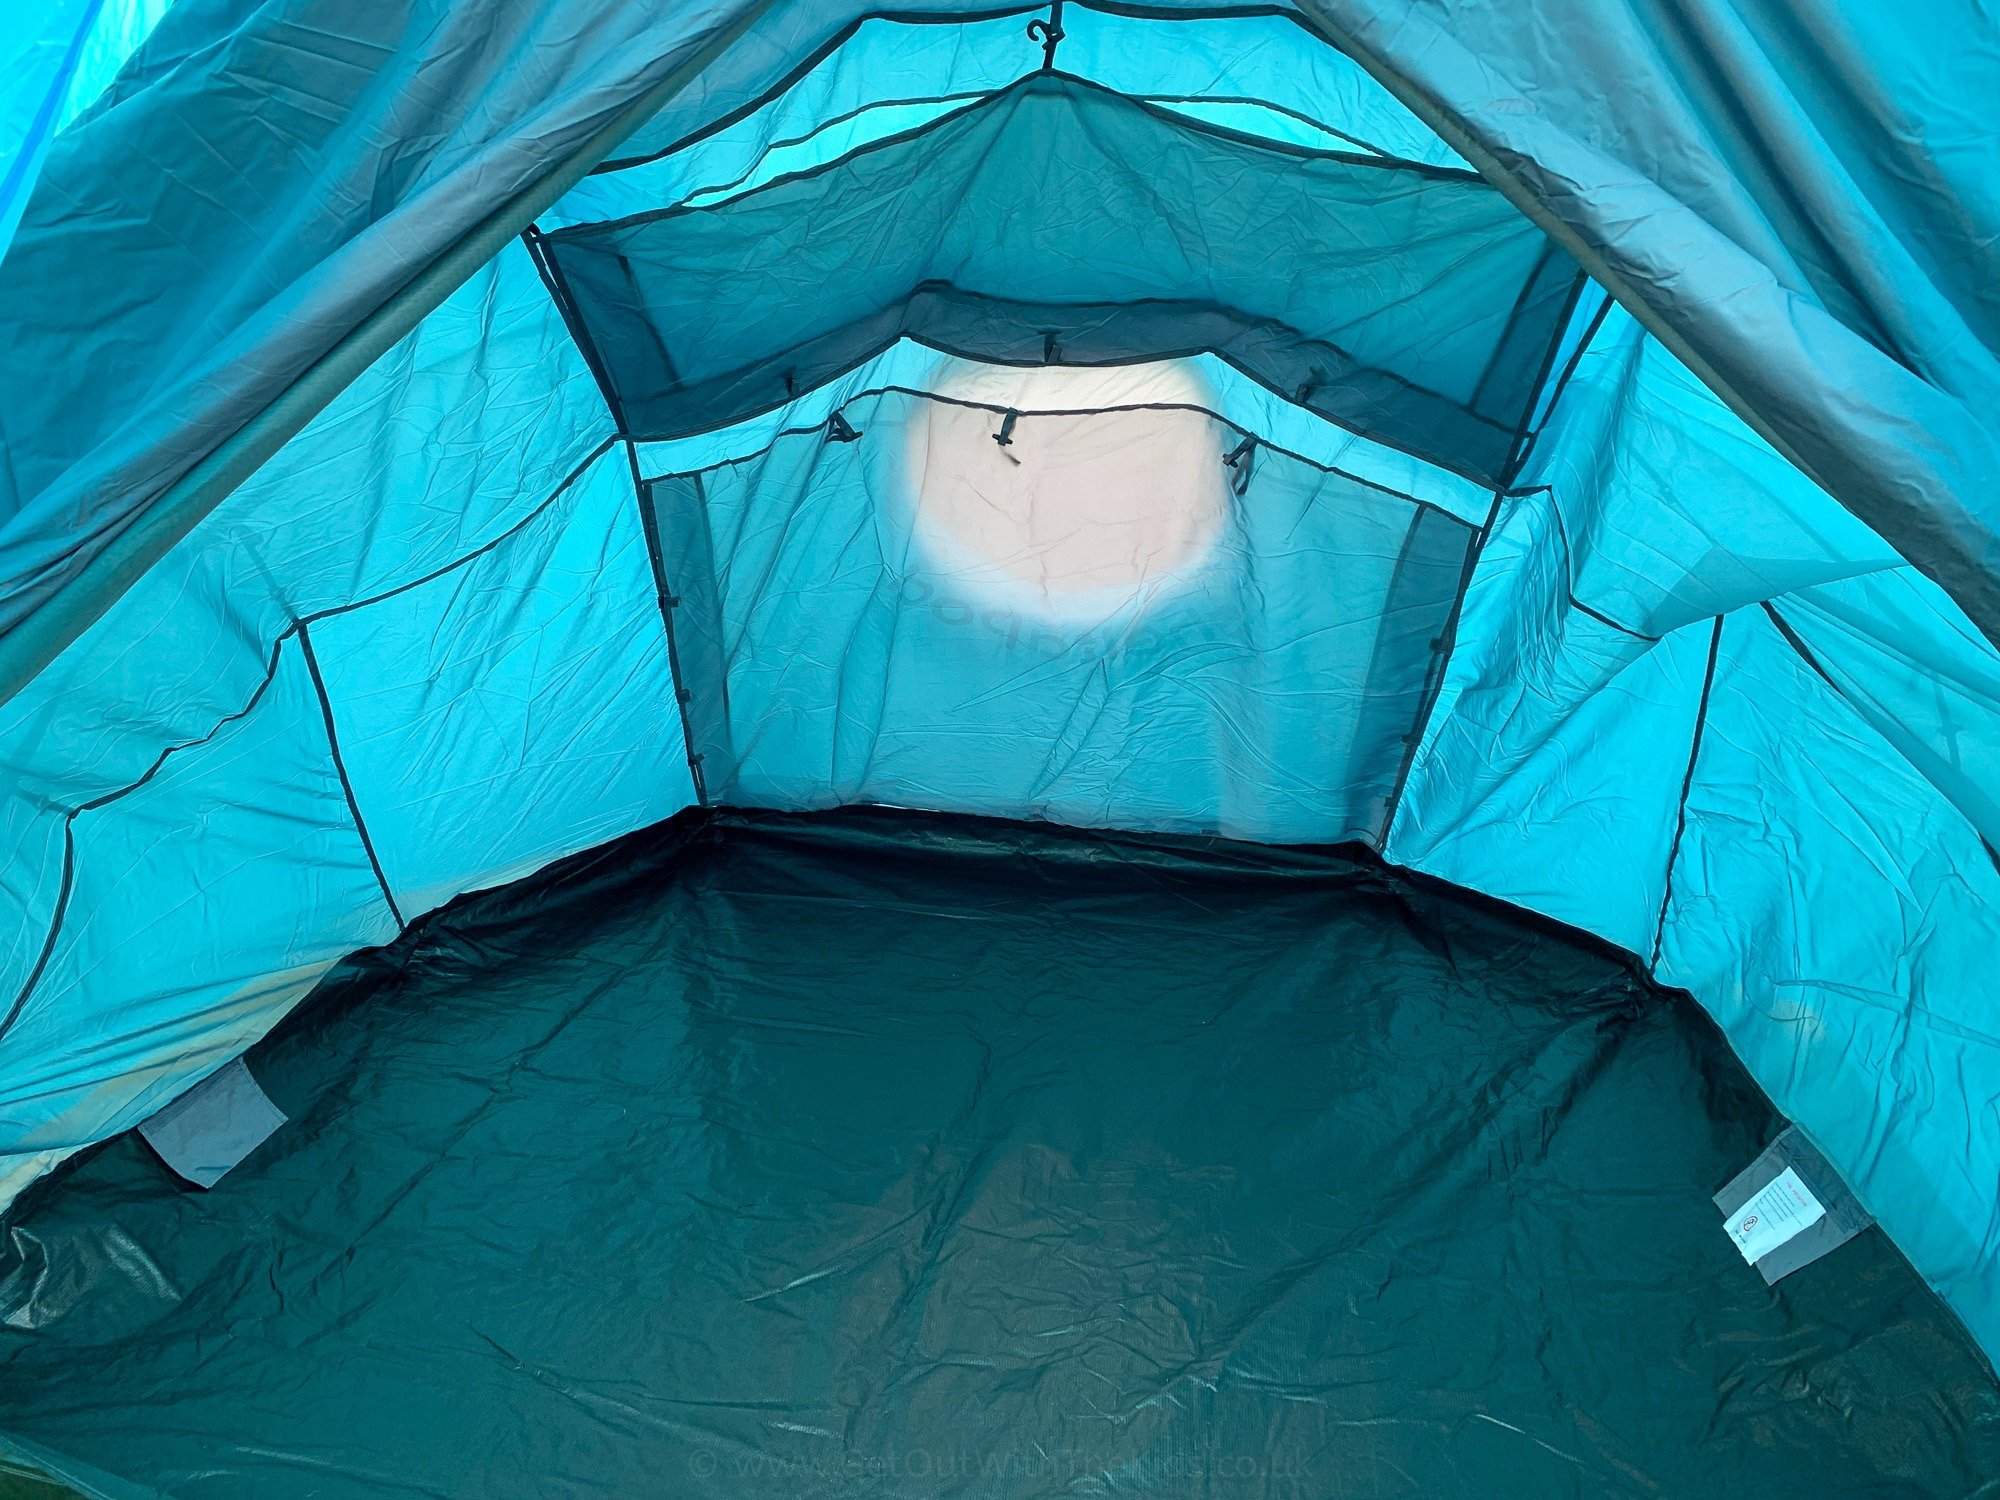 The inner-tent of the SheltaPod